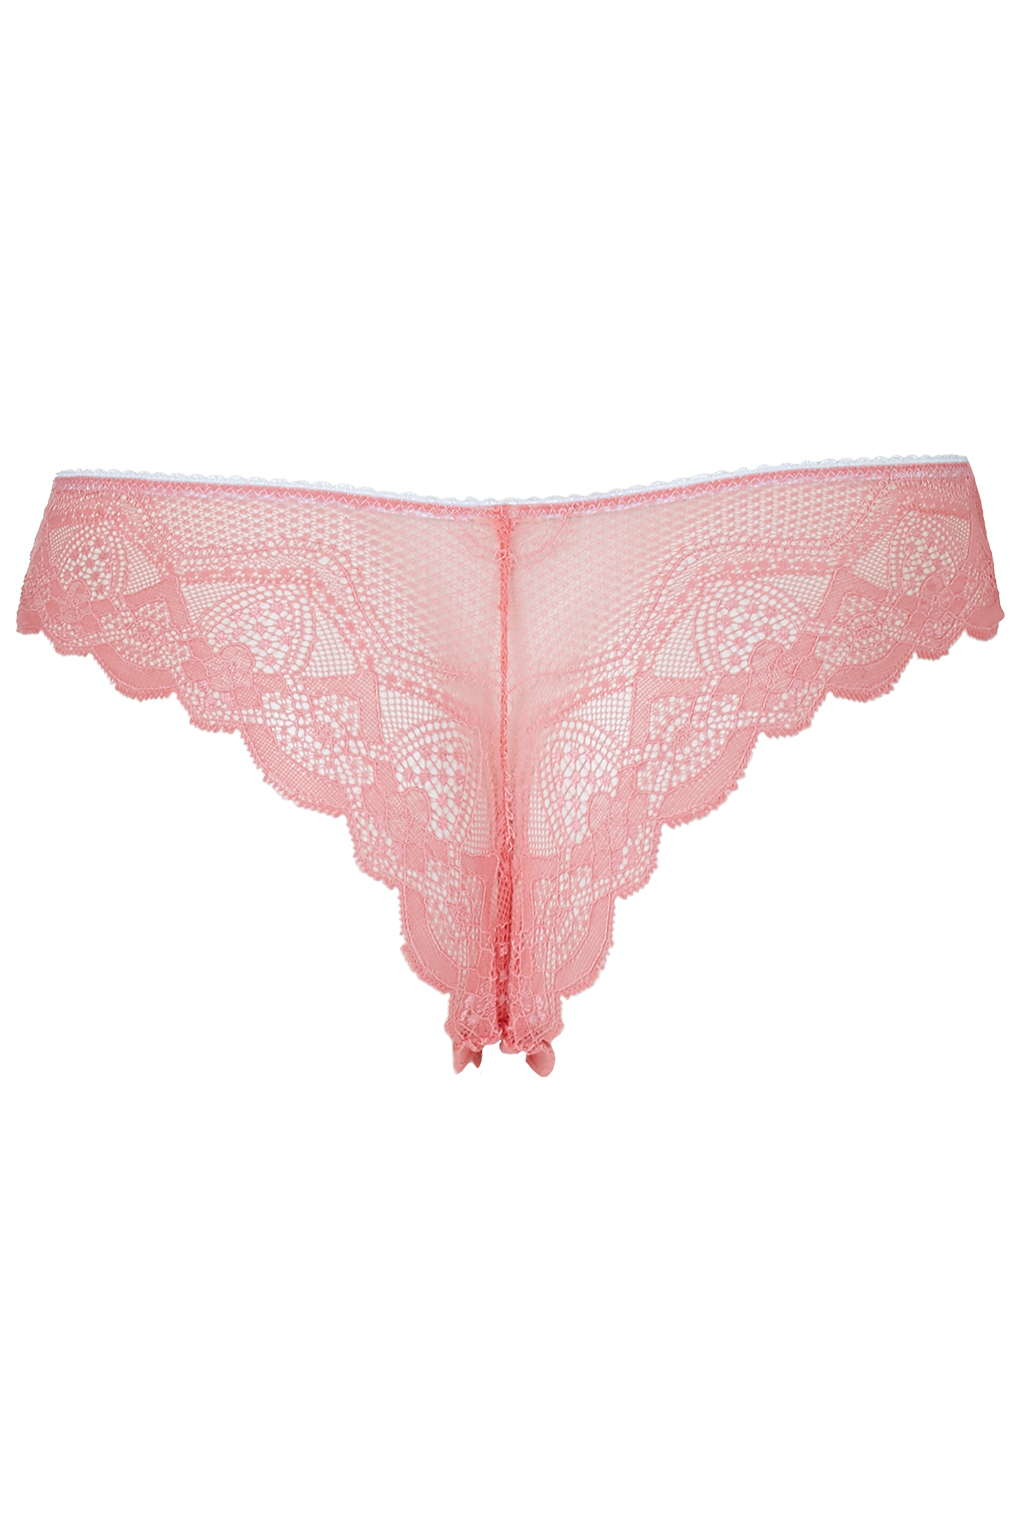 Topshop Lace Brazilian Panties in Pink | Lyst